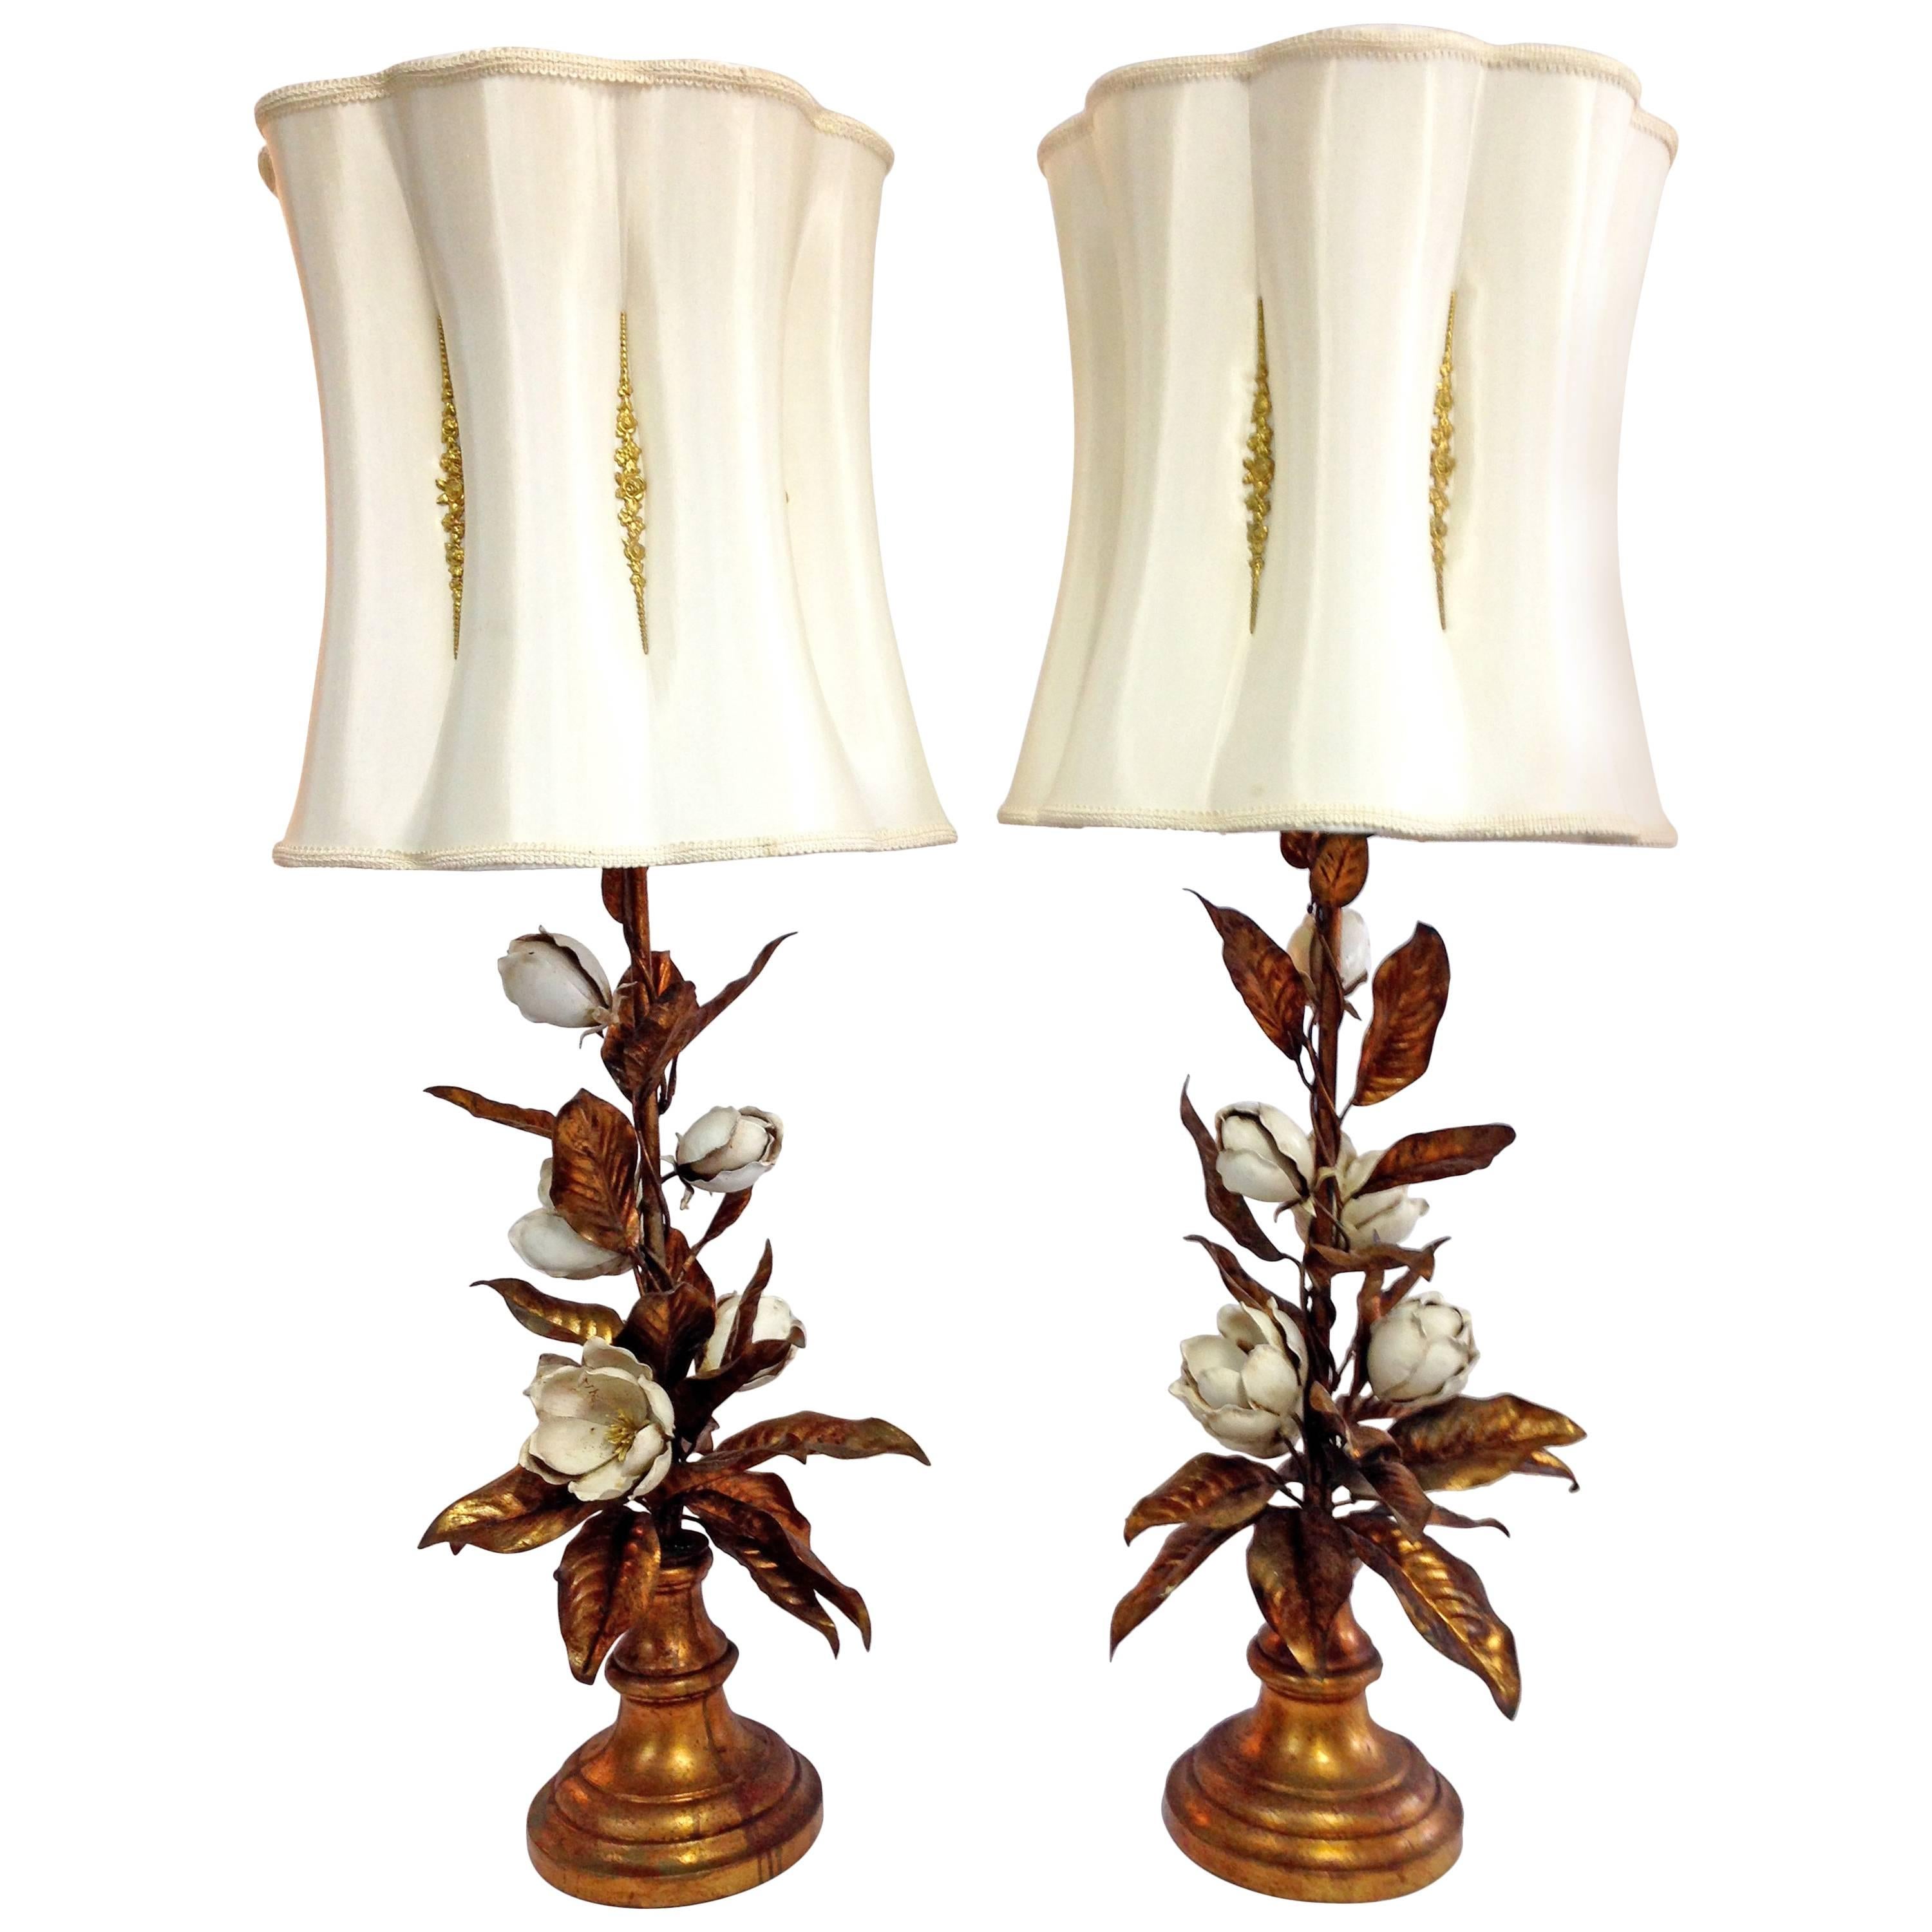 Pair of Vintage Tall Italian Tole Gilt Brass Rose Leaf Lamps